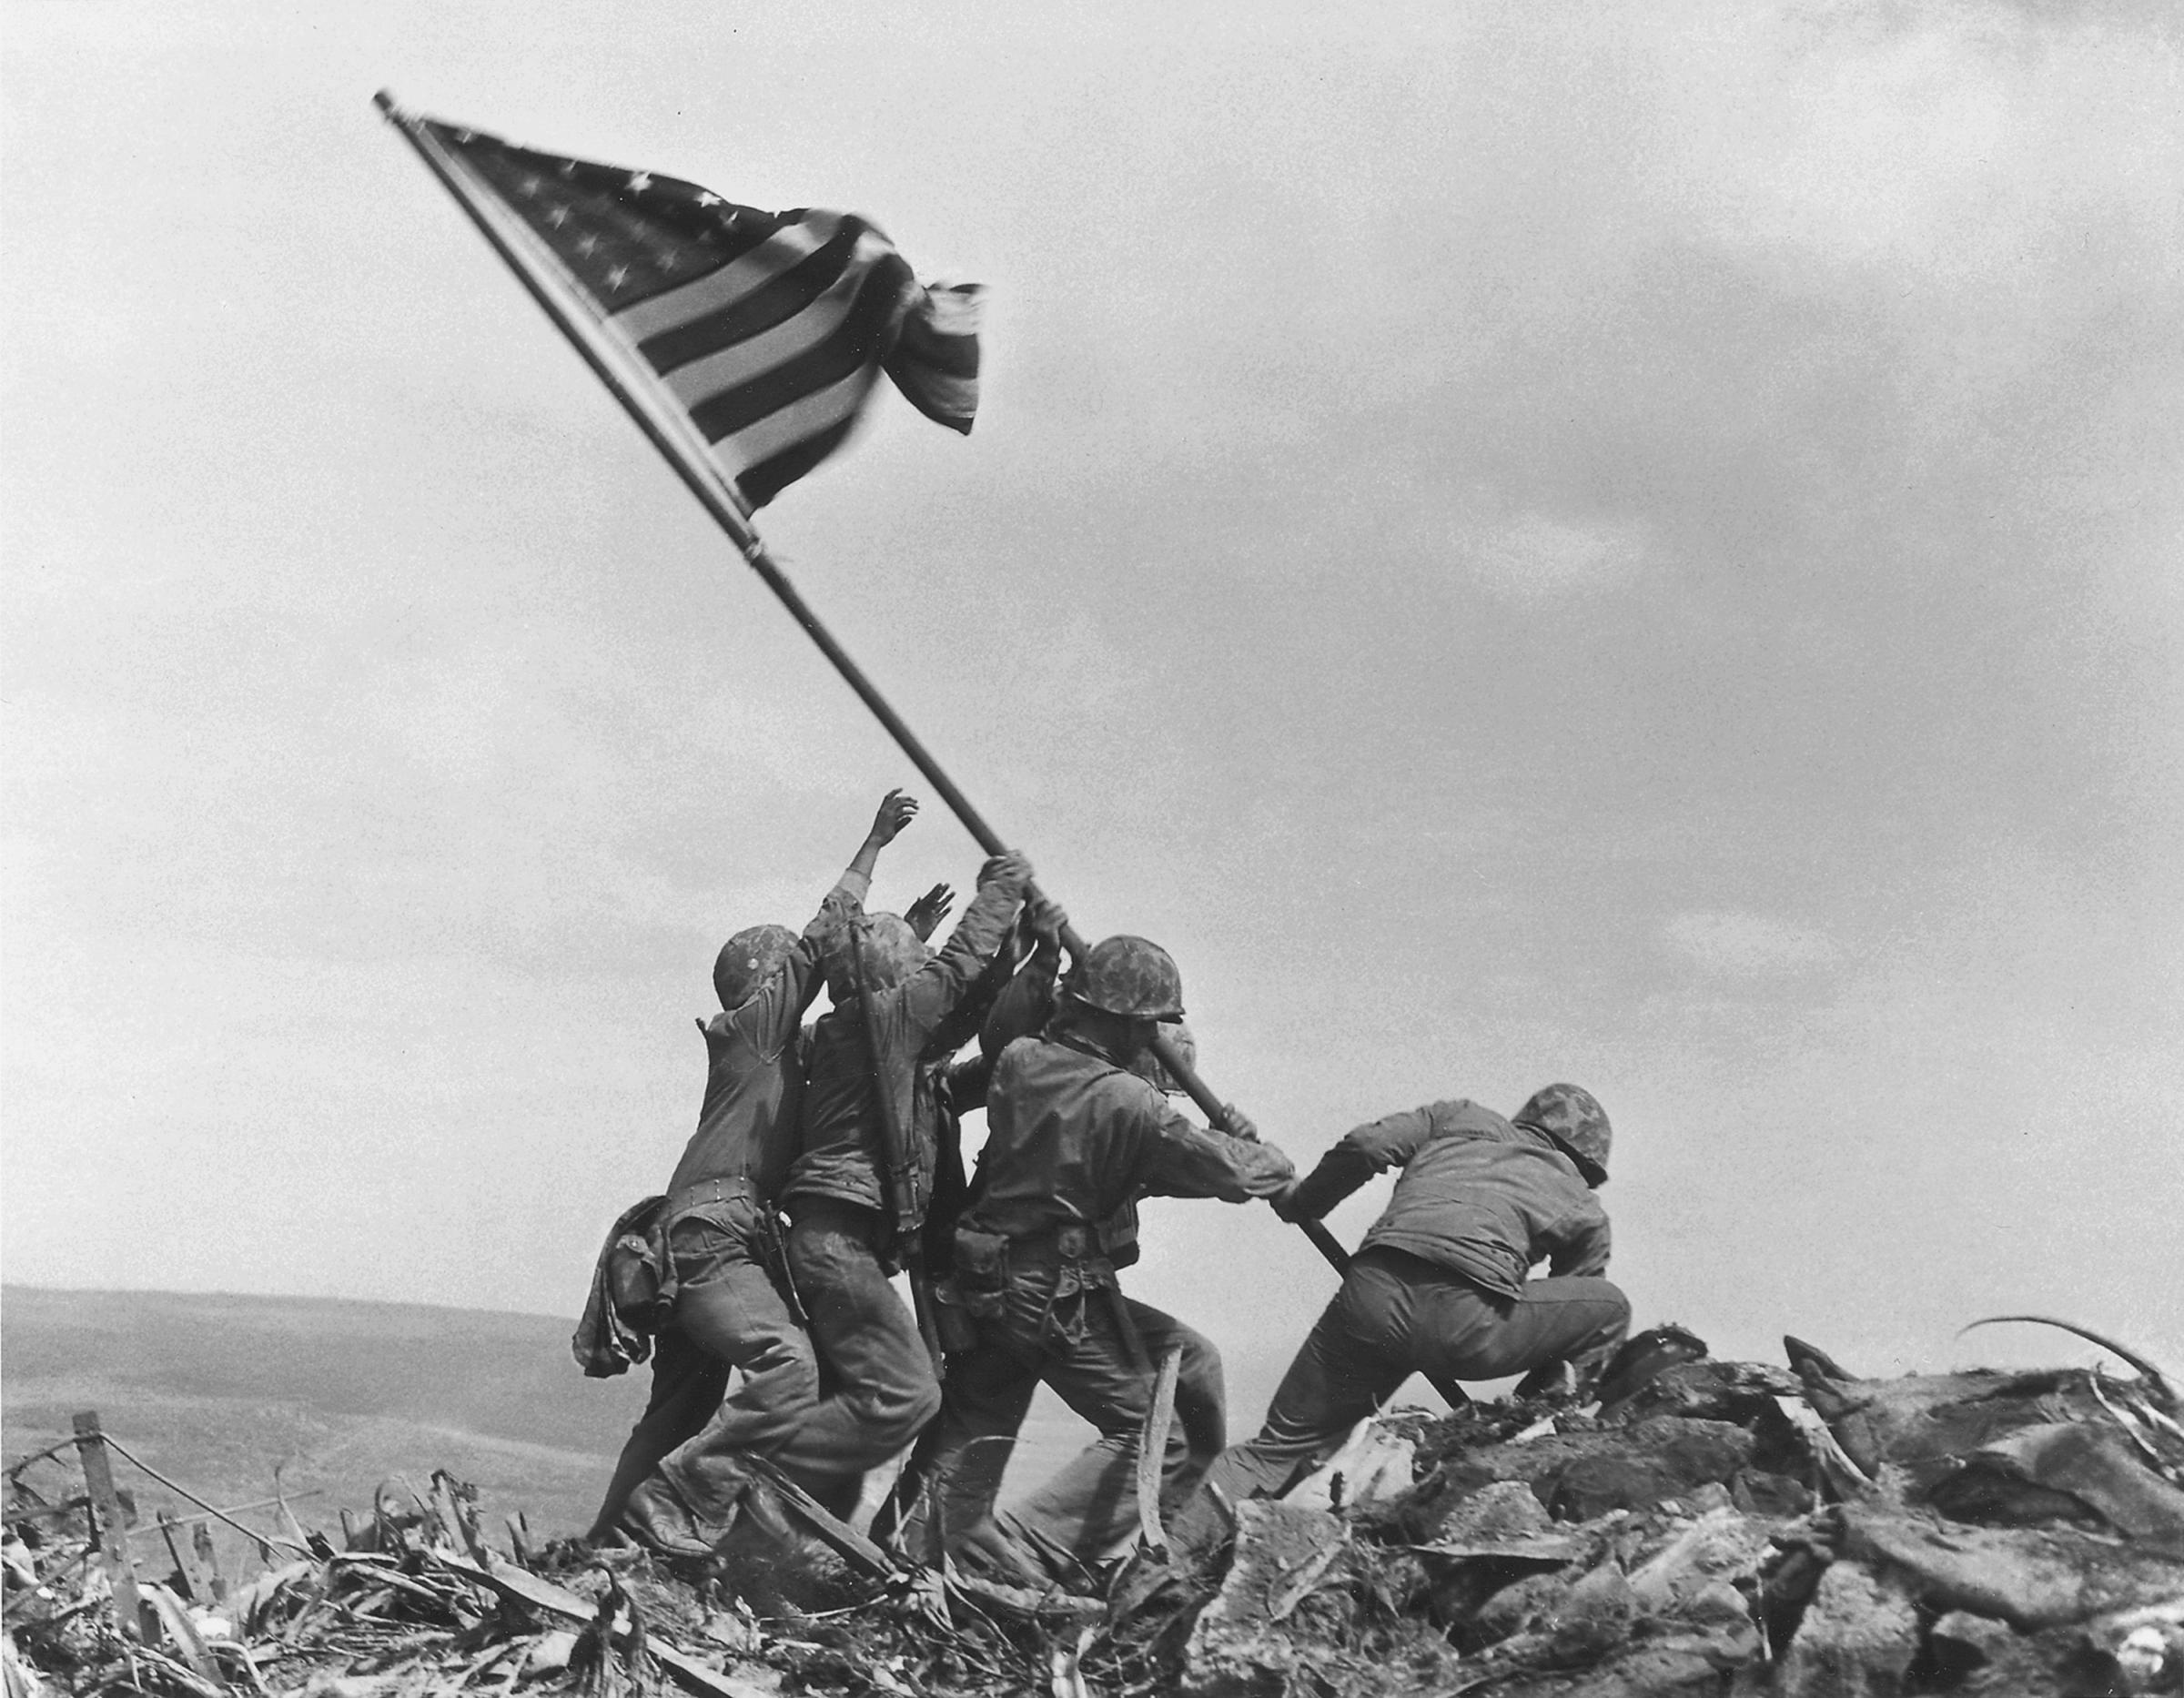 U.S. Marines of the 28th Regiment, 5th Division, raise the American flag atop Mt. Suribachi, Iwo Jima, on Feb. 23, 1945. Strategically located only 660 miles from Tokyo, the Pacific island became the site of one of the bloodiest, most famous battles of World War II against Japan.